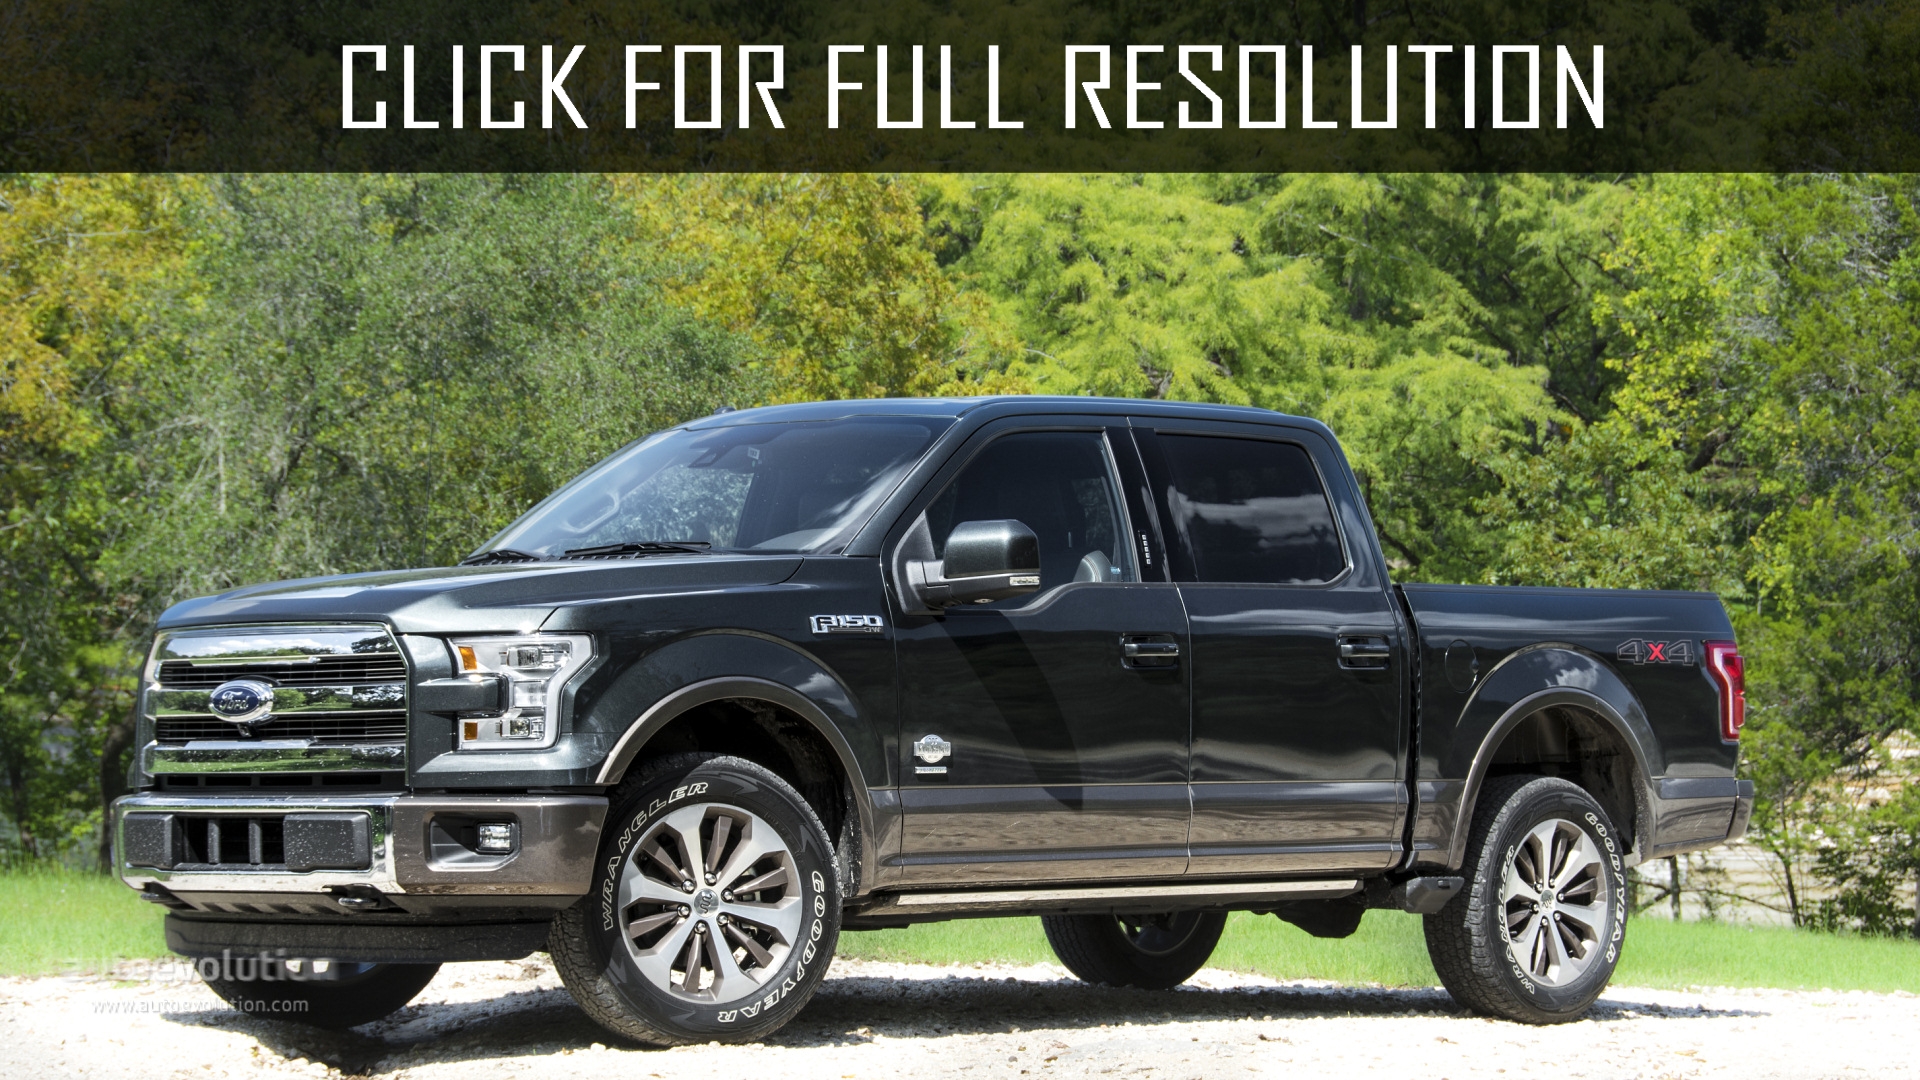 2015 Ford F150